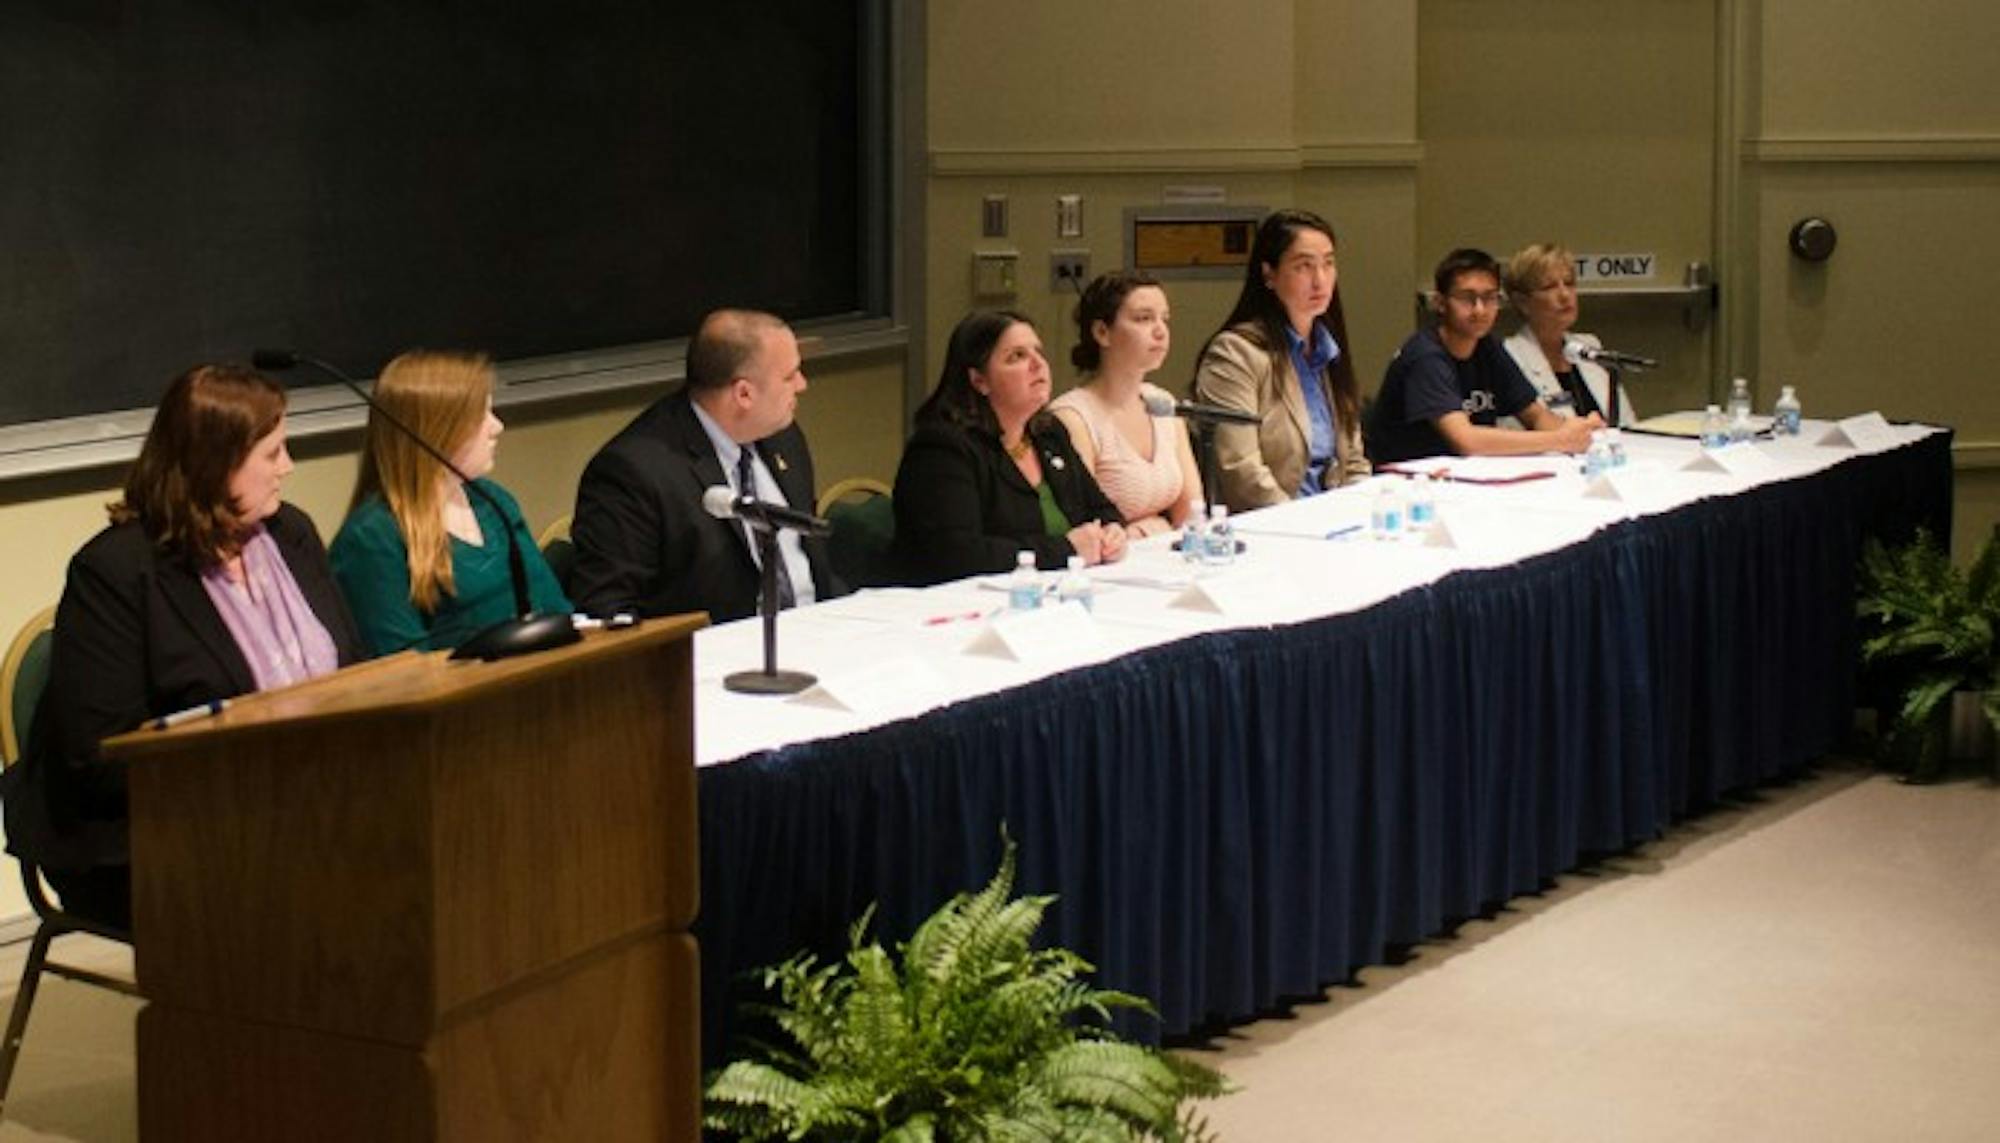 Students, faculty and staff gathered in DeBartolo Hall on Wednesday night to discuss how to prevent and respond to incidences of sexual assault on campus. Panelists reflected on the recent Campus Climate results.